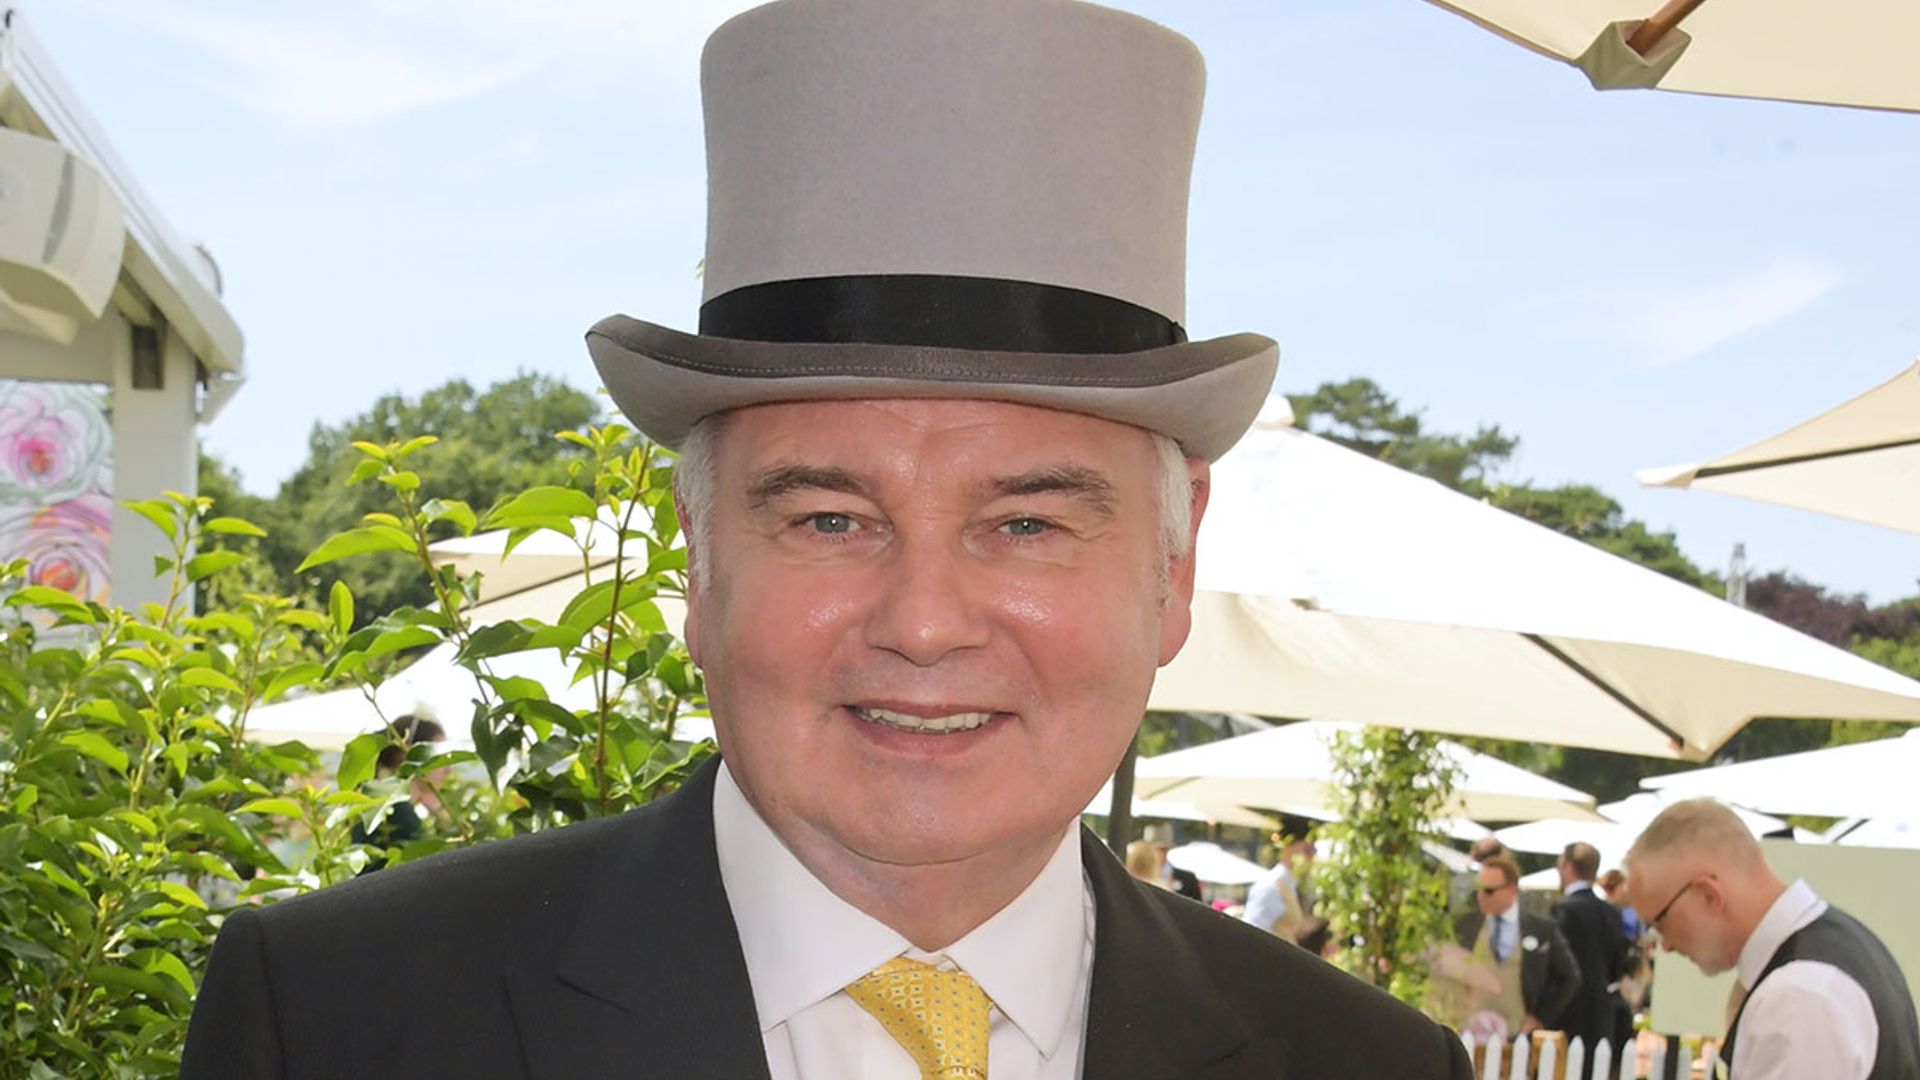 Eamonn Holmes delights fans with glamorous rare photo of daughter Rebecca at Royal Ascot